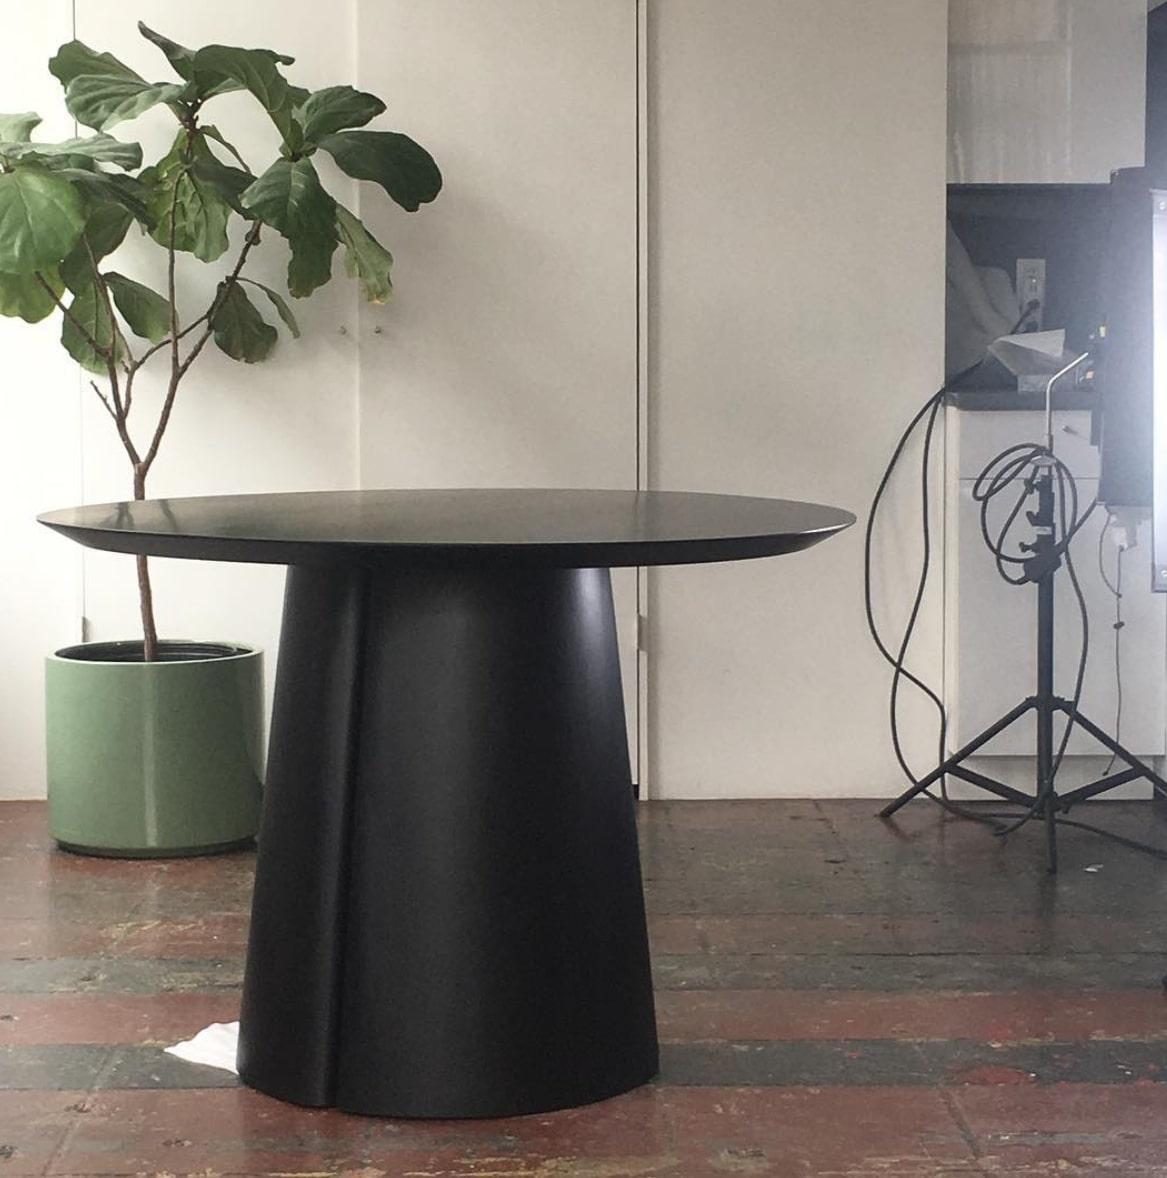 Wood Column Round Table by Black Table Studio, Maple, Represented by Tuleste Factory